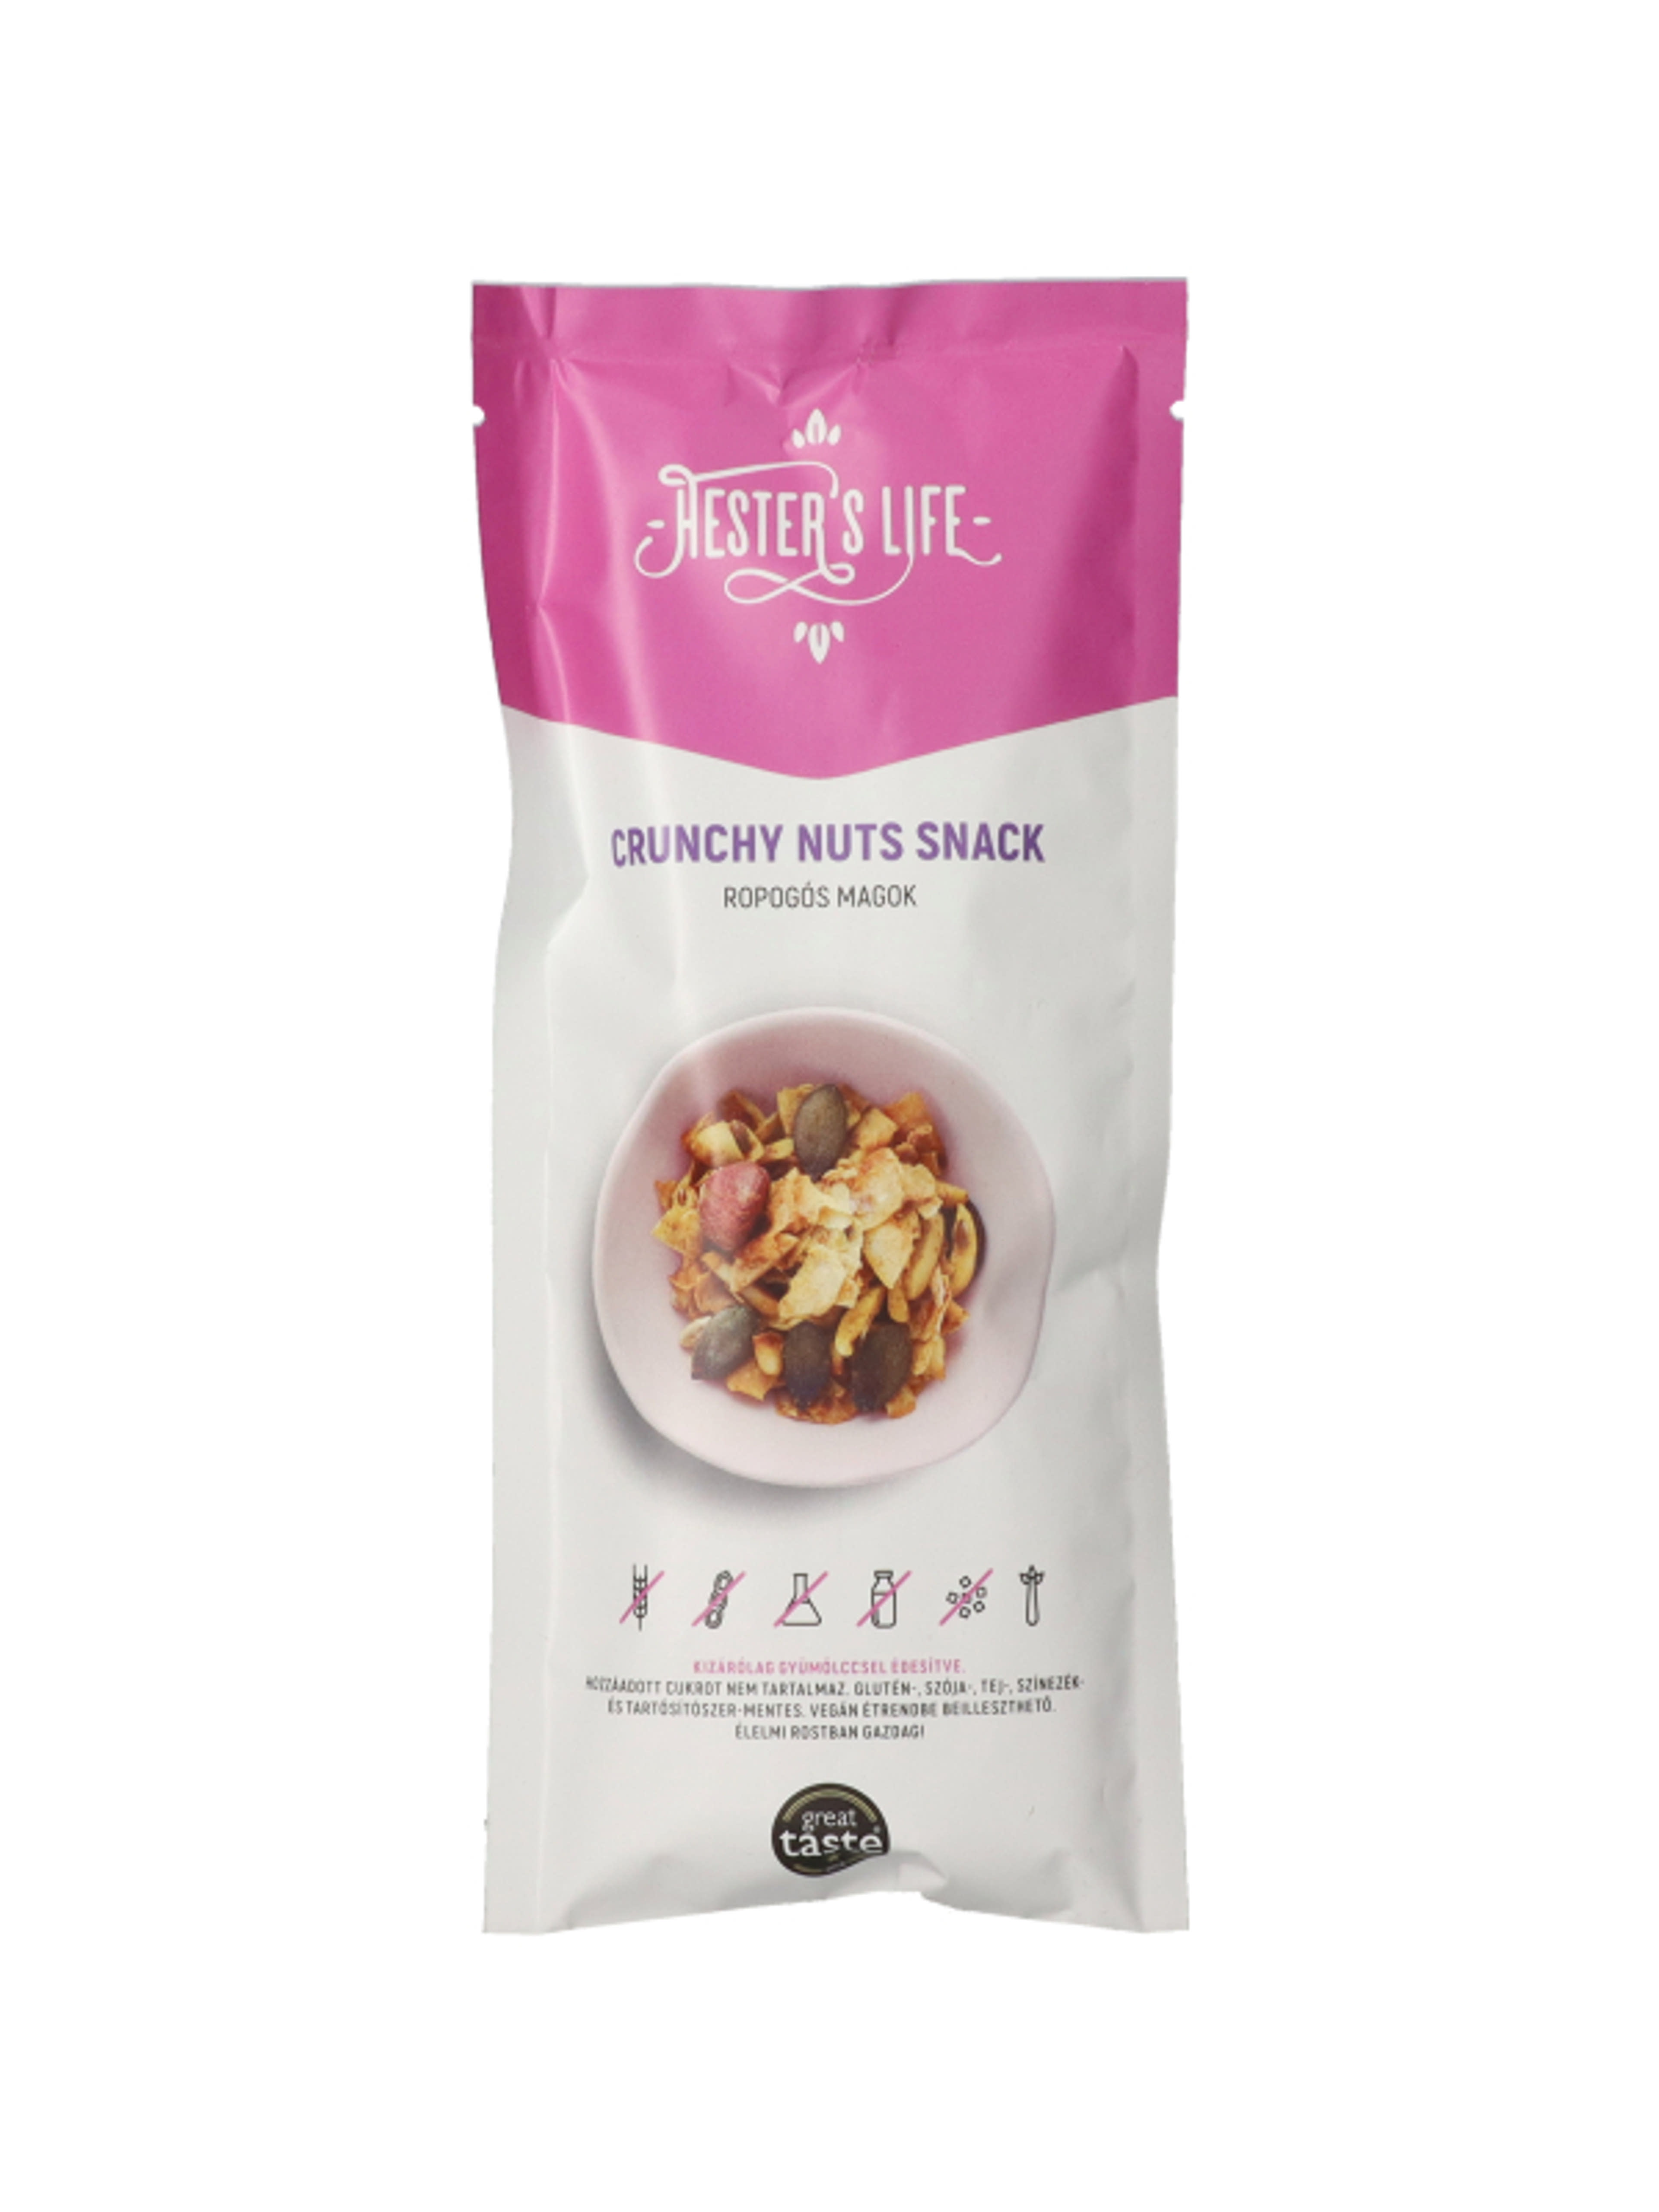 Hesters life crunchy nuts snack - 60 g-2